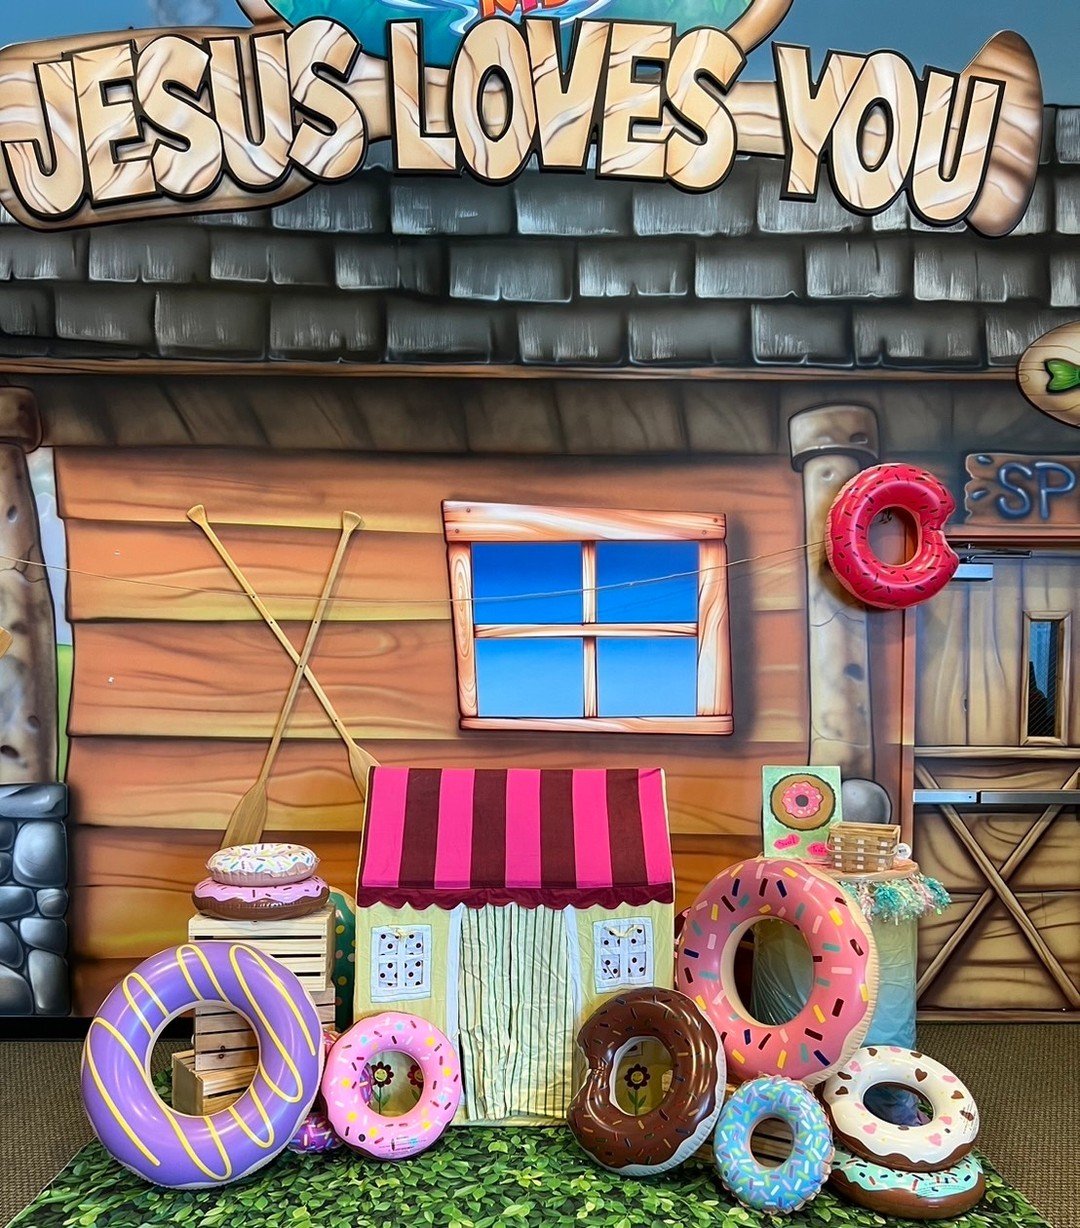 See!👇
Our Riverkids have decorated a cute donut space and hope that everyone can support the children's home's fundraising and adoption.🍩🍪
If you didn't join us last week, you have another chance this Sunday!
This Sunday, we still will hold the ev